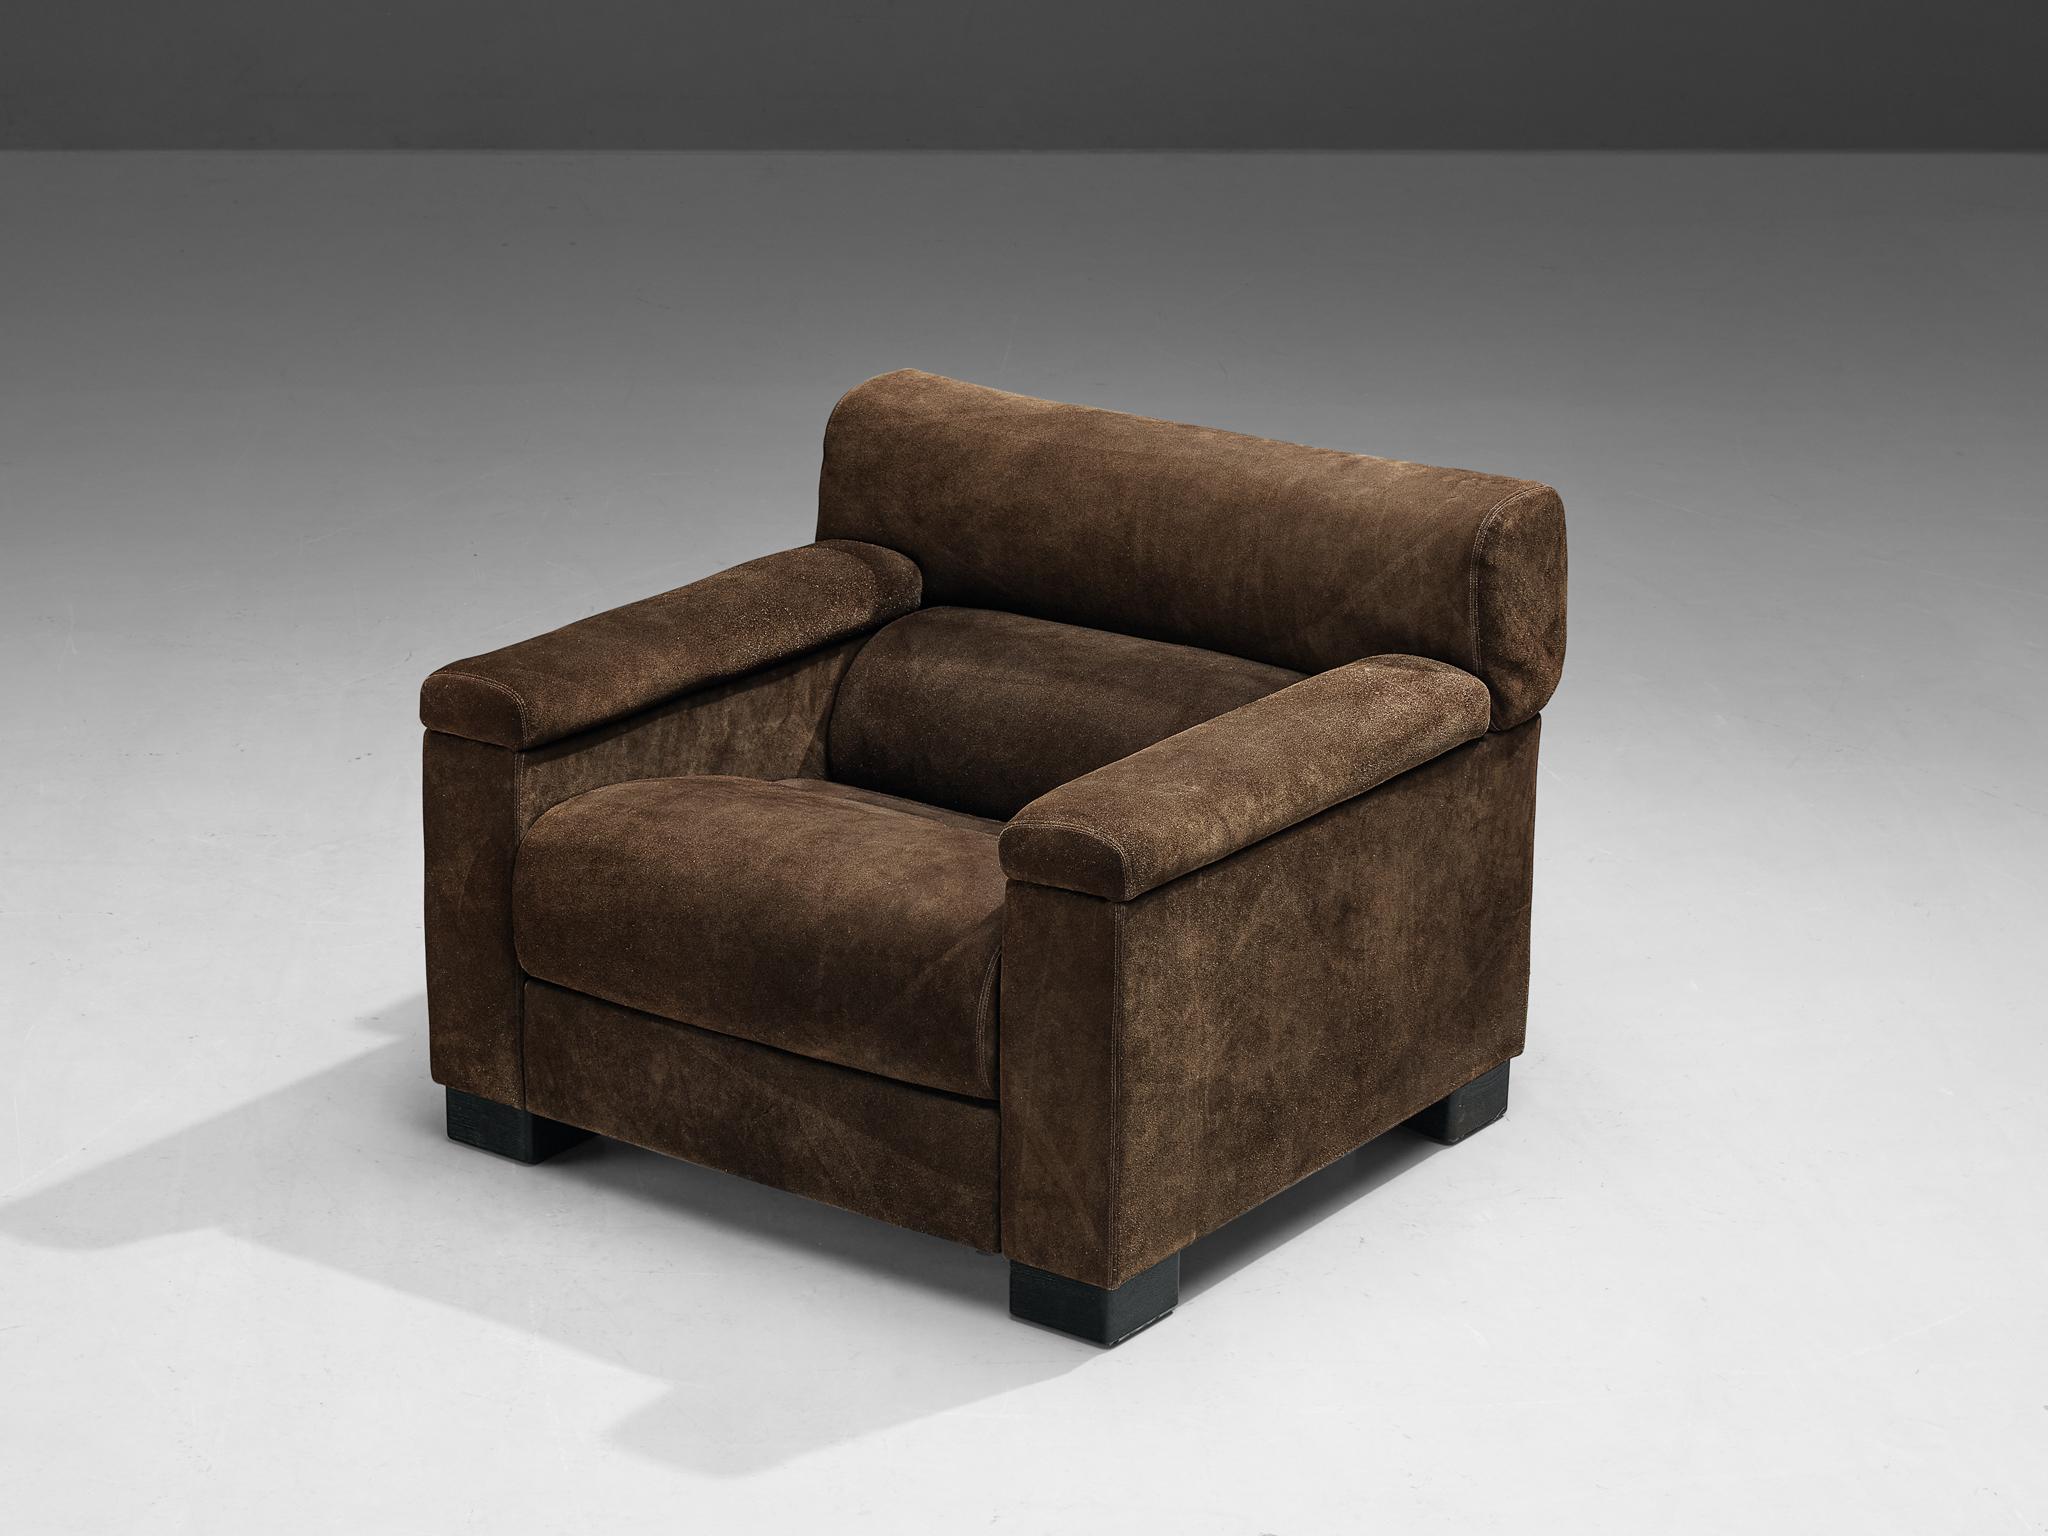 Tecno, lounge chair, suede, dark stained wood, Italy, 1960s. 

A substantial and sizable armchair produced by Italian furniture company Tecno. The bulky appearance is amplified by the upholstery, which features a dark brown suede upholstery. The